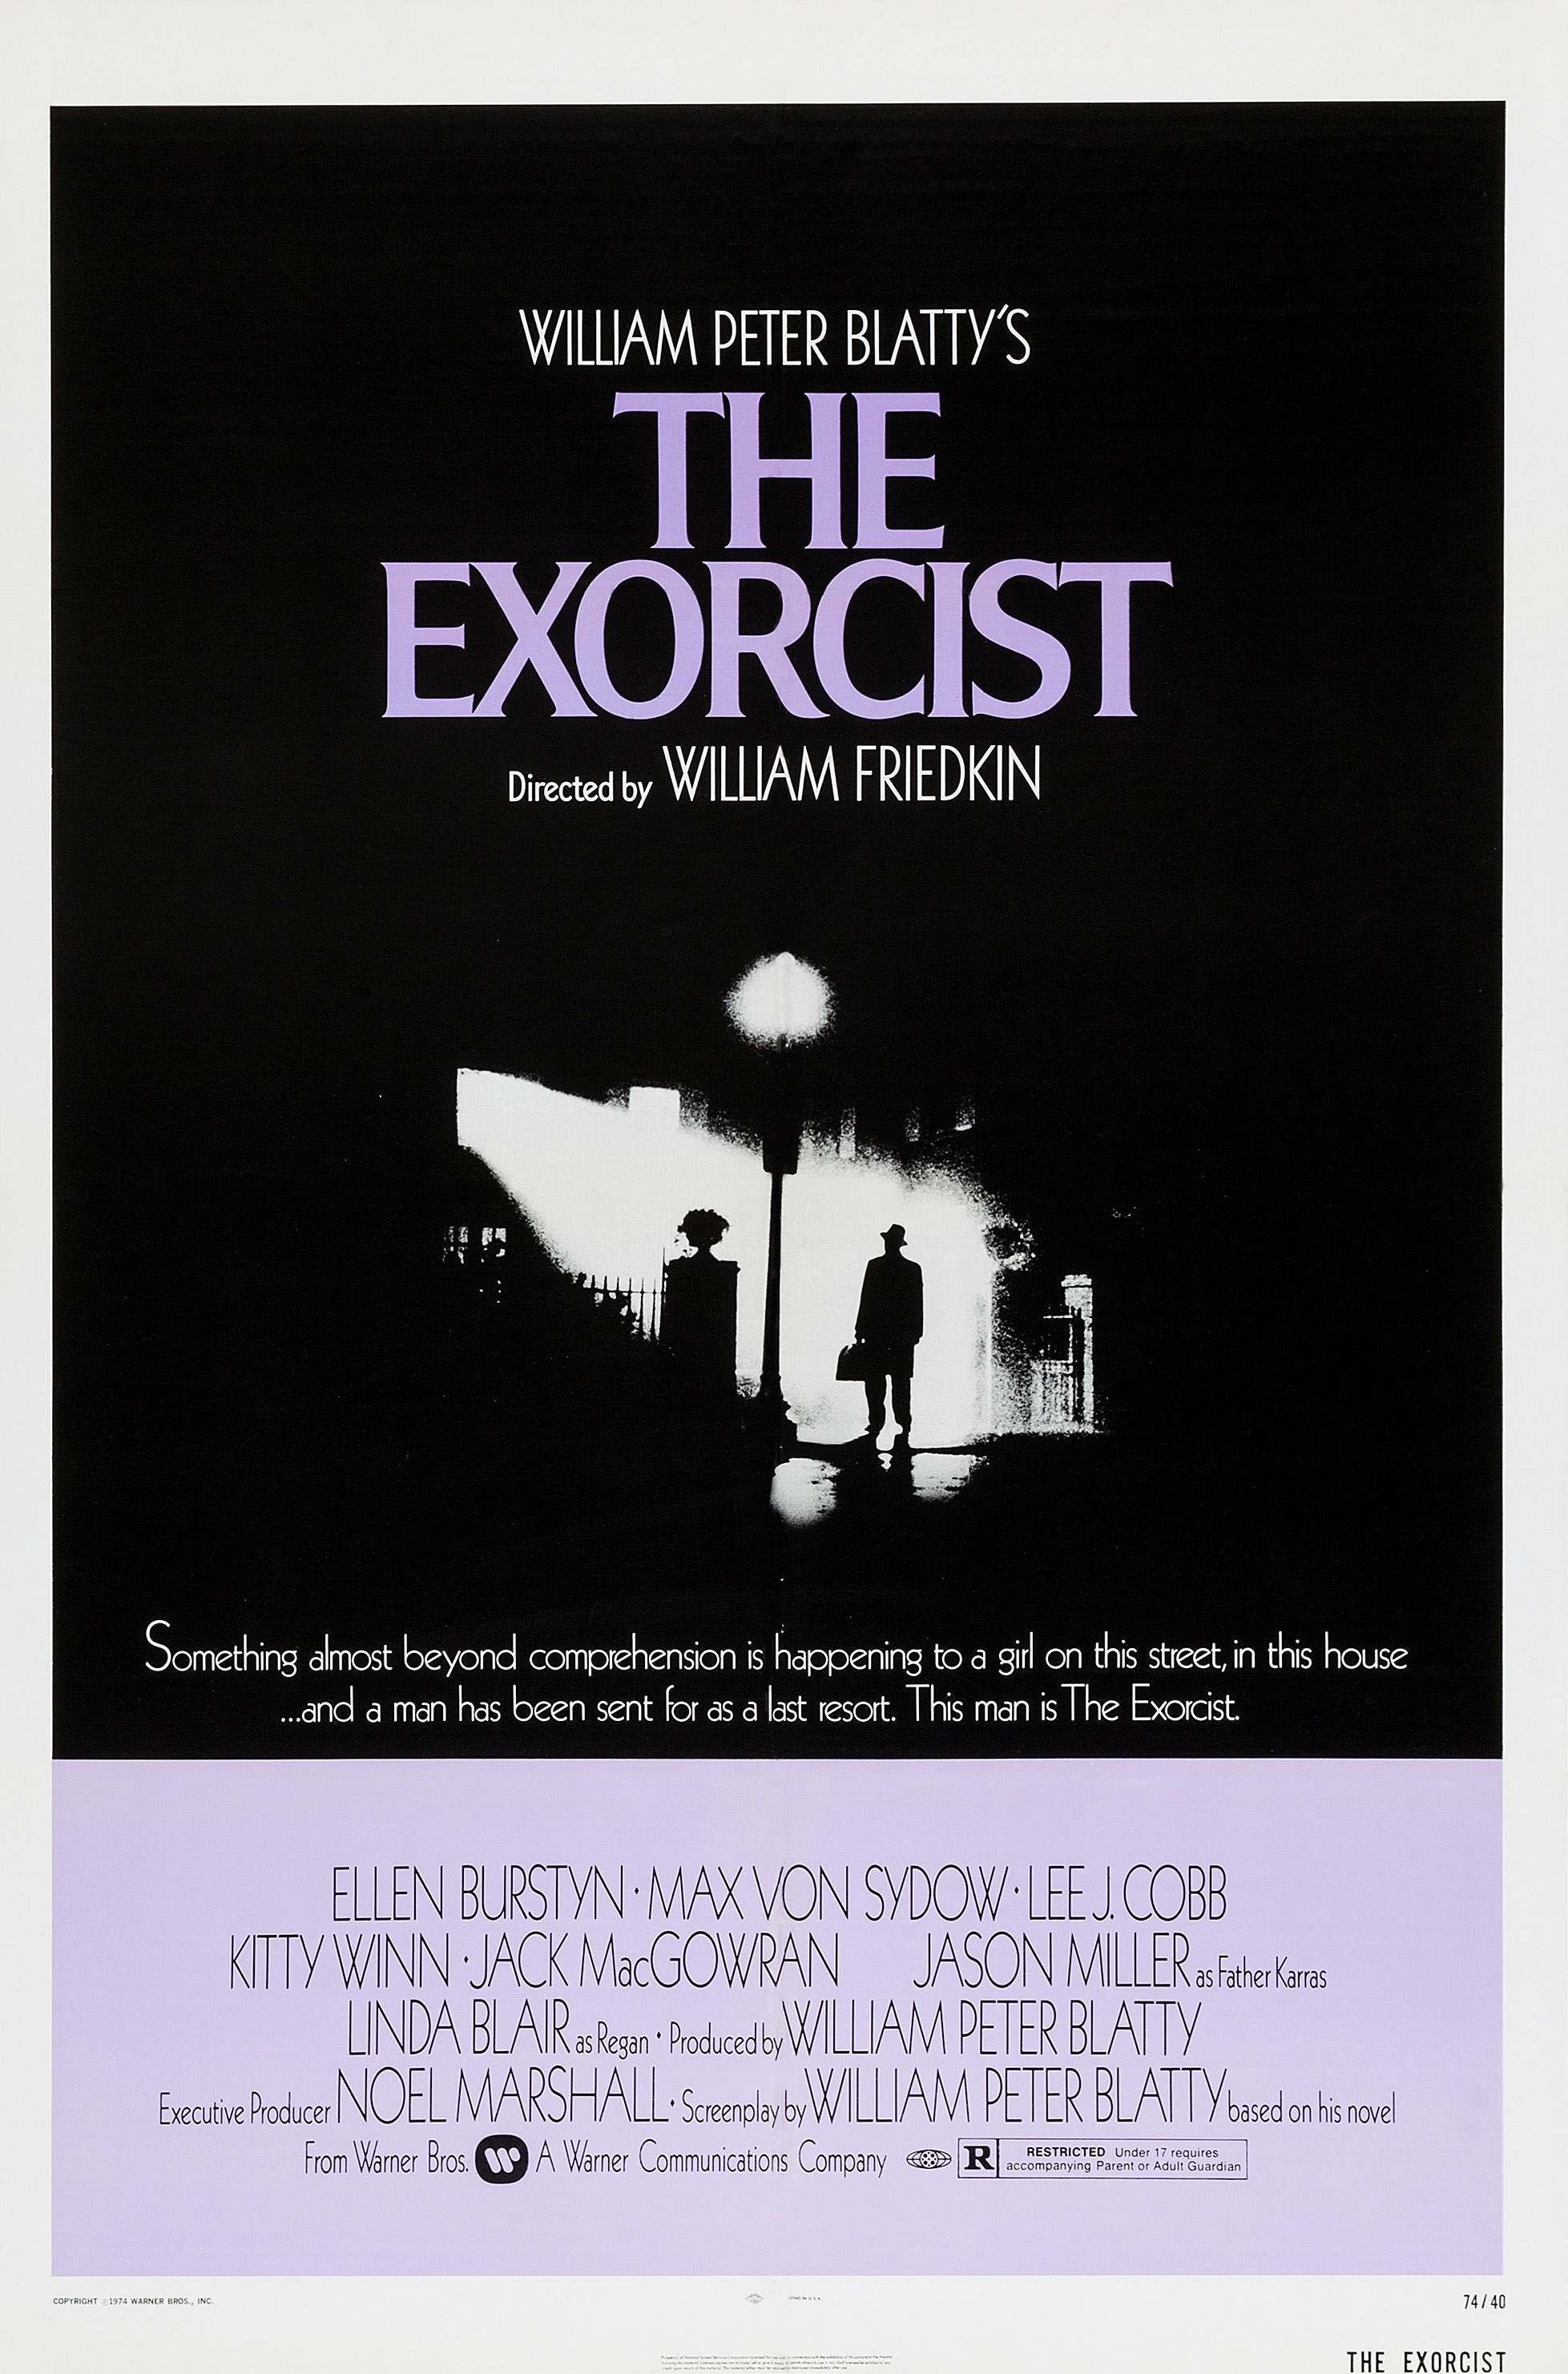 The theatrical poster for &quot;The Exorcist&quot; (1973)